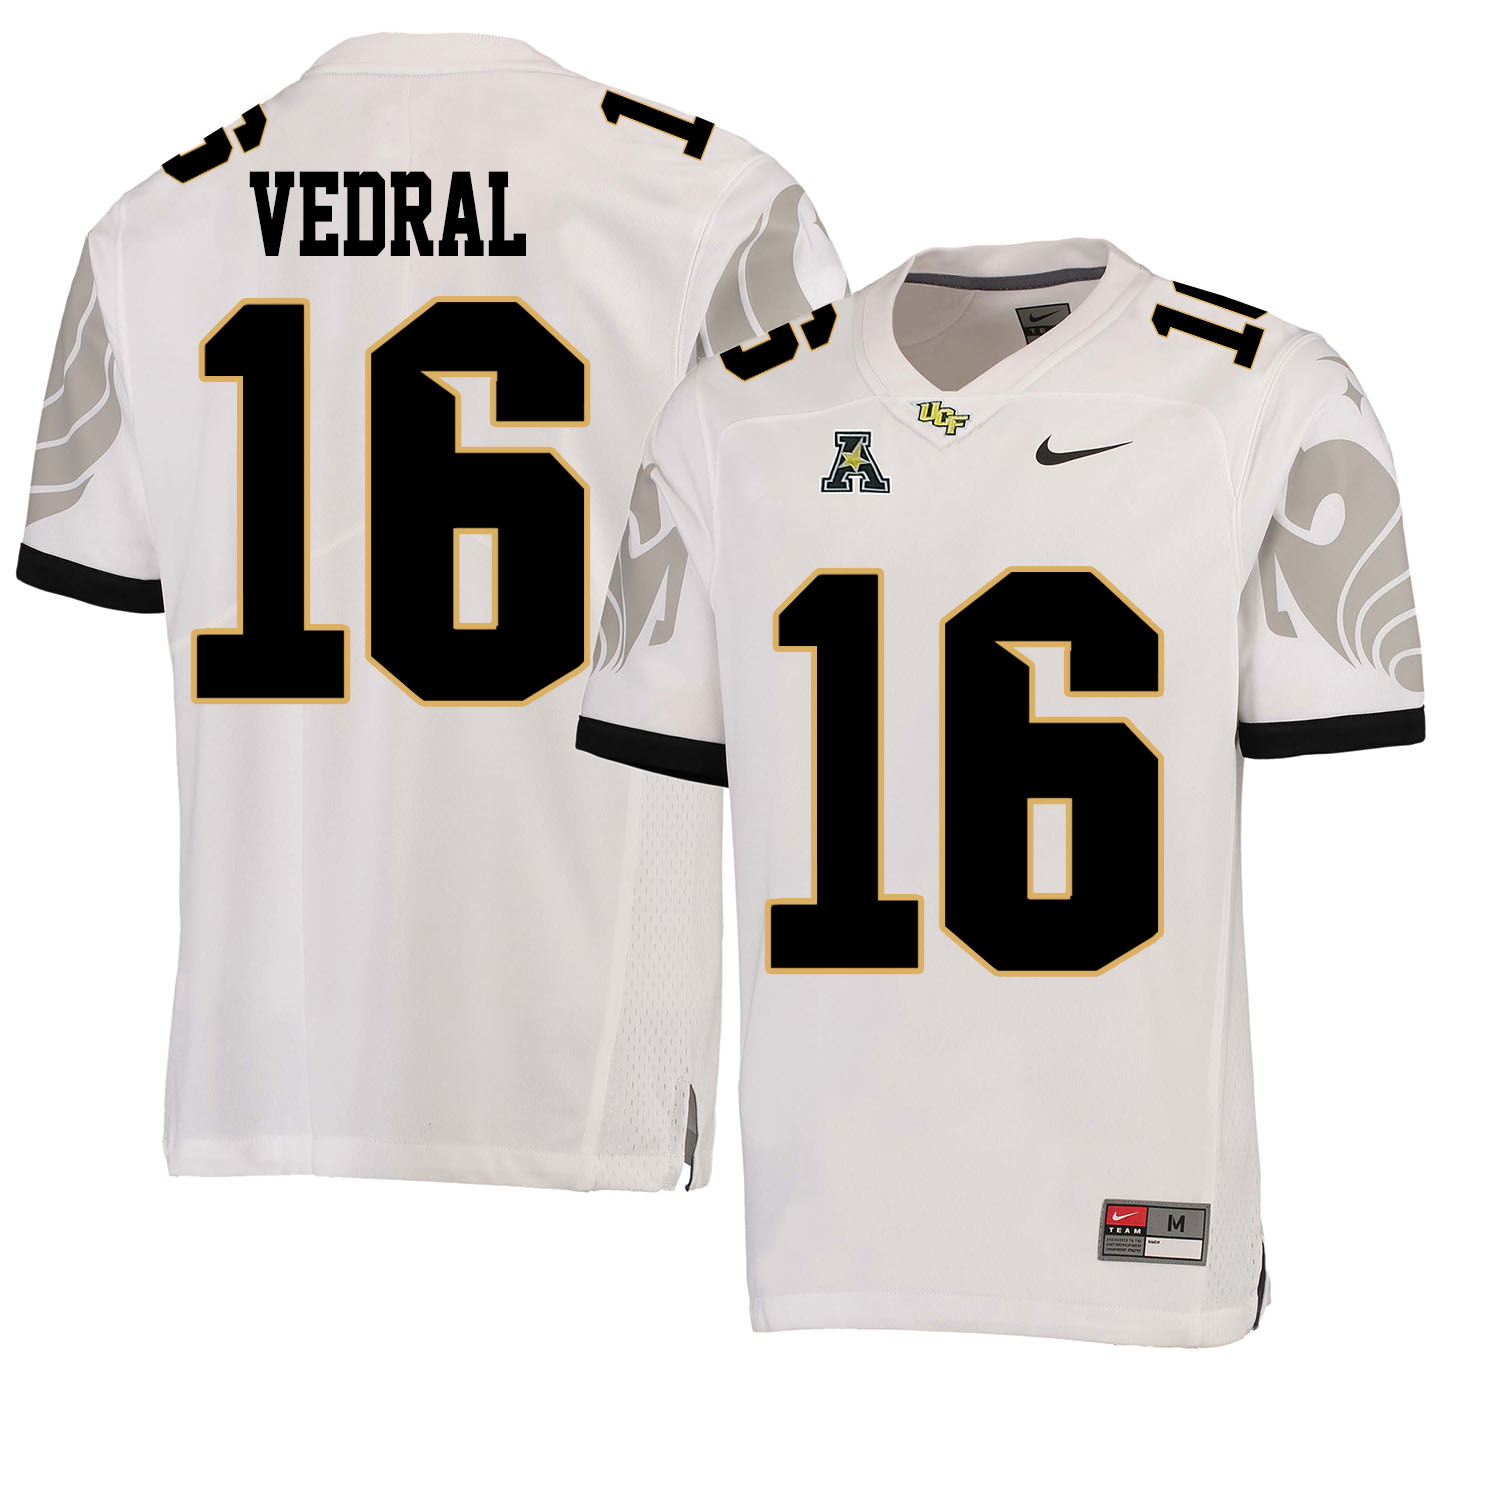 UCF Knights 16 Noah Vedral White College Football Jersey